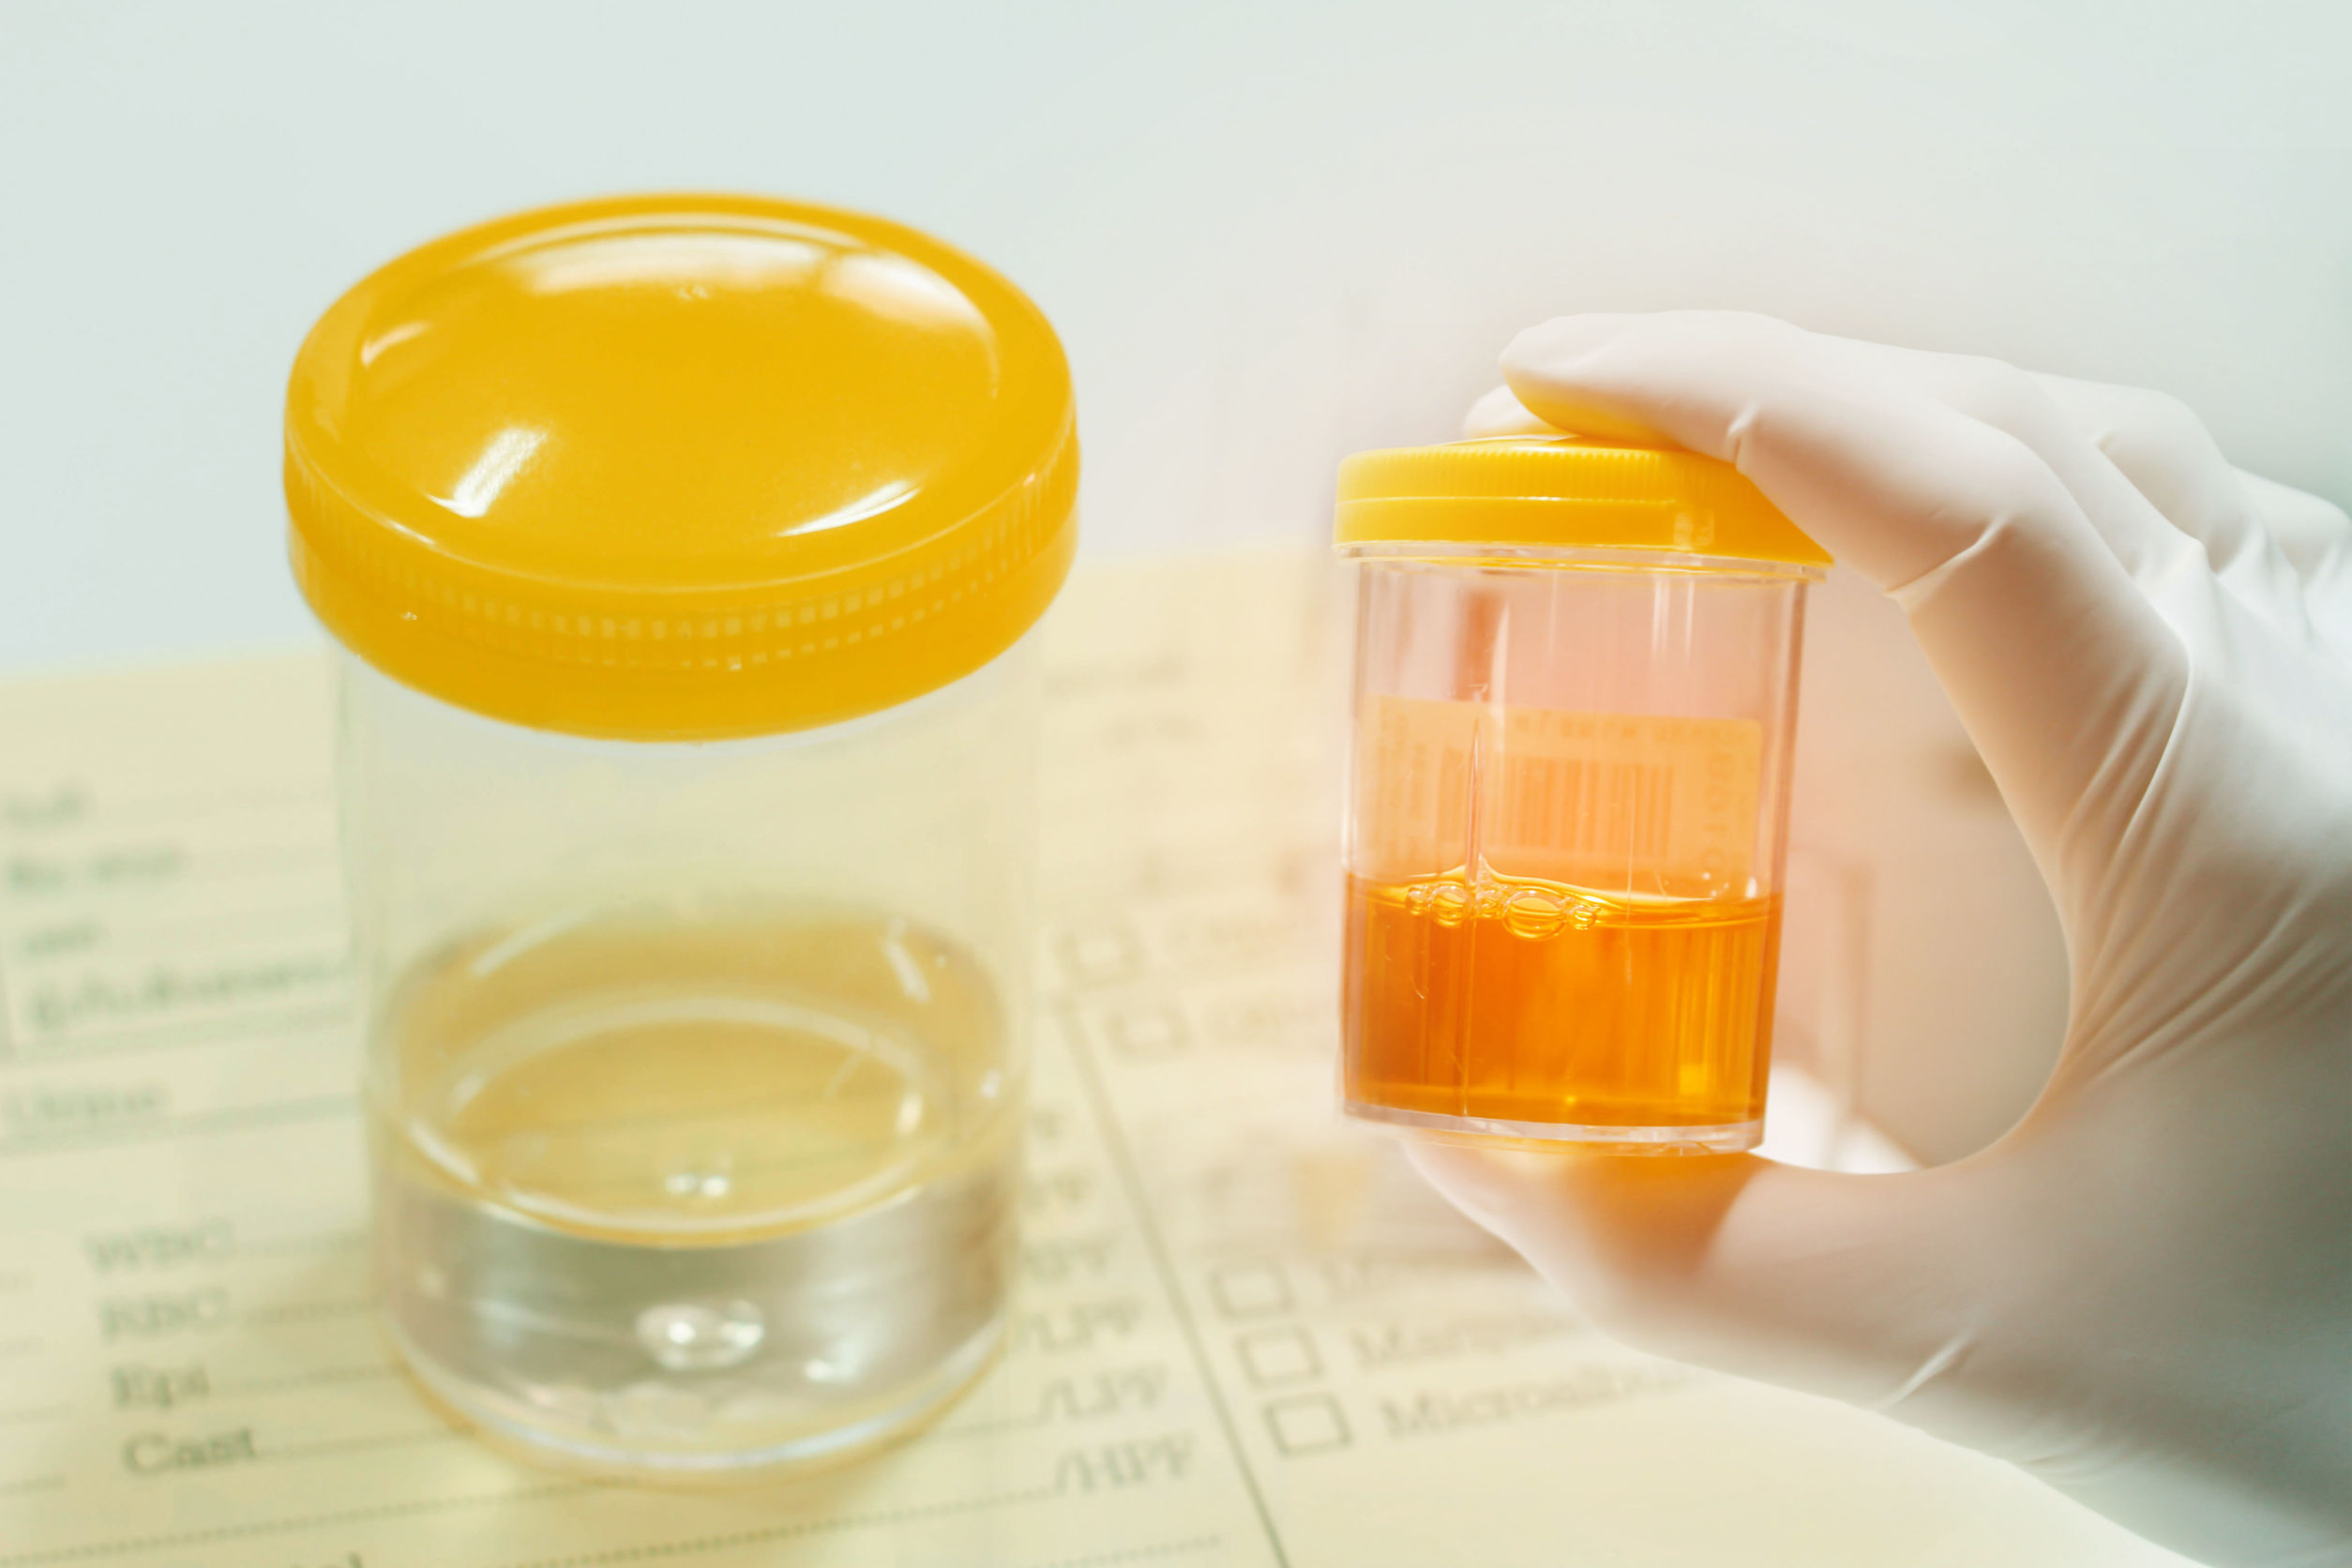 Urine Drug Testing vs. Oral Fluid Testing: Which Is the Best Choice for Employers?